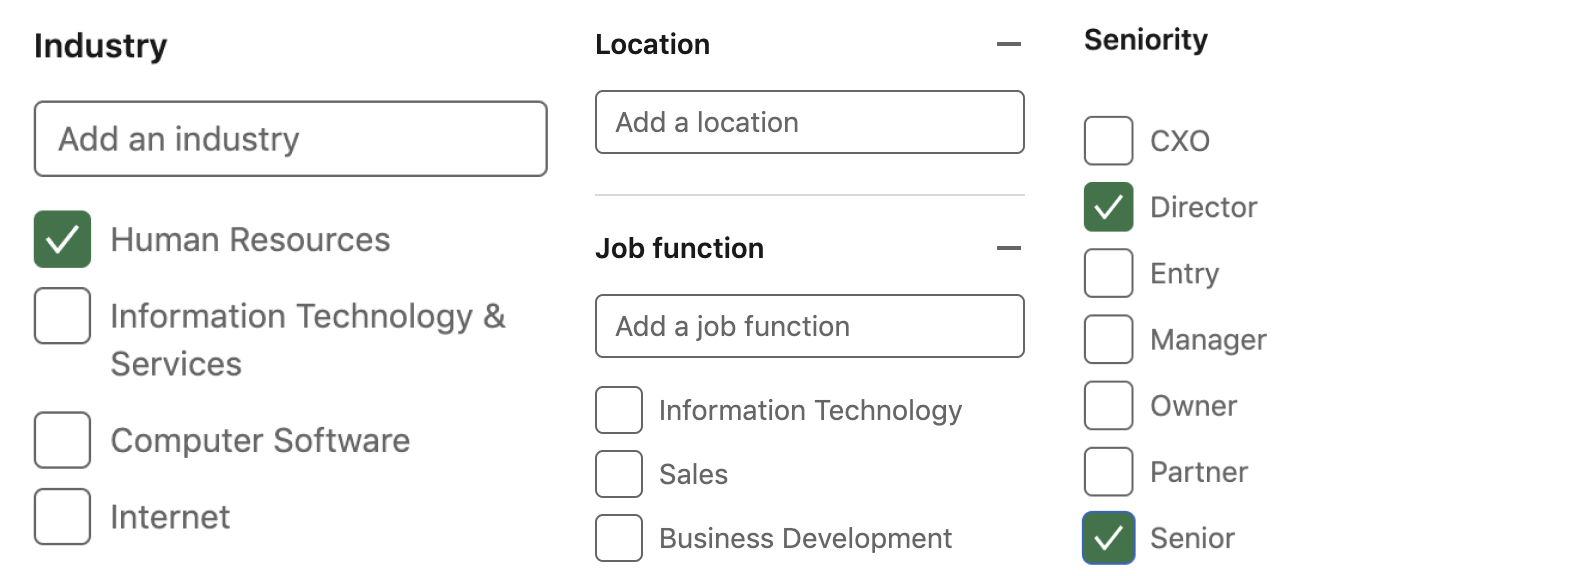 Business attributes example from Linkedin.